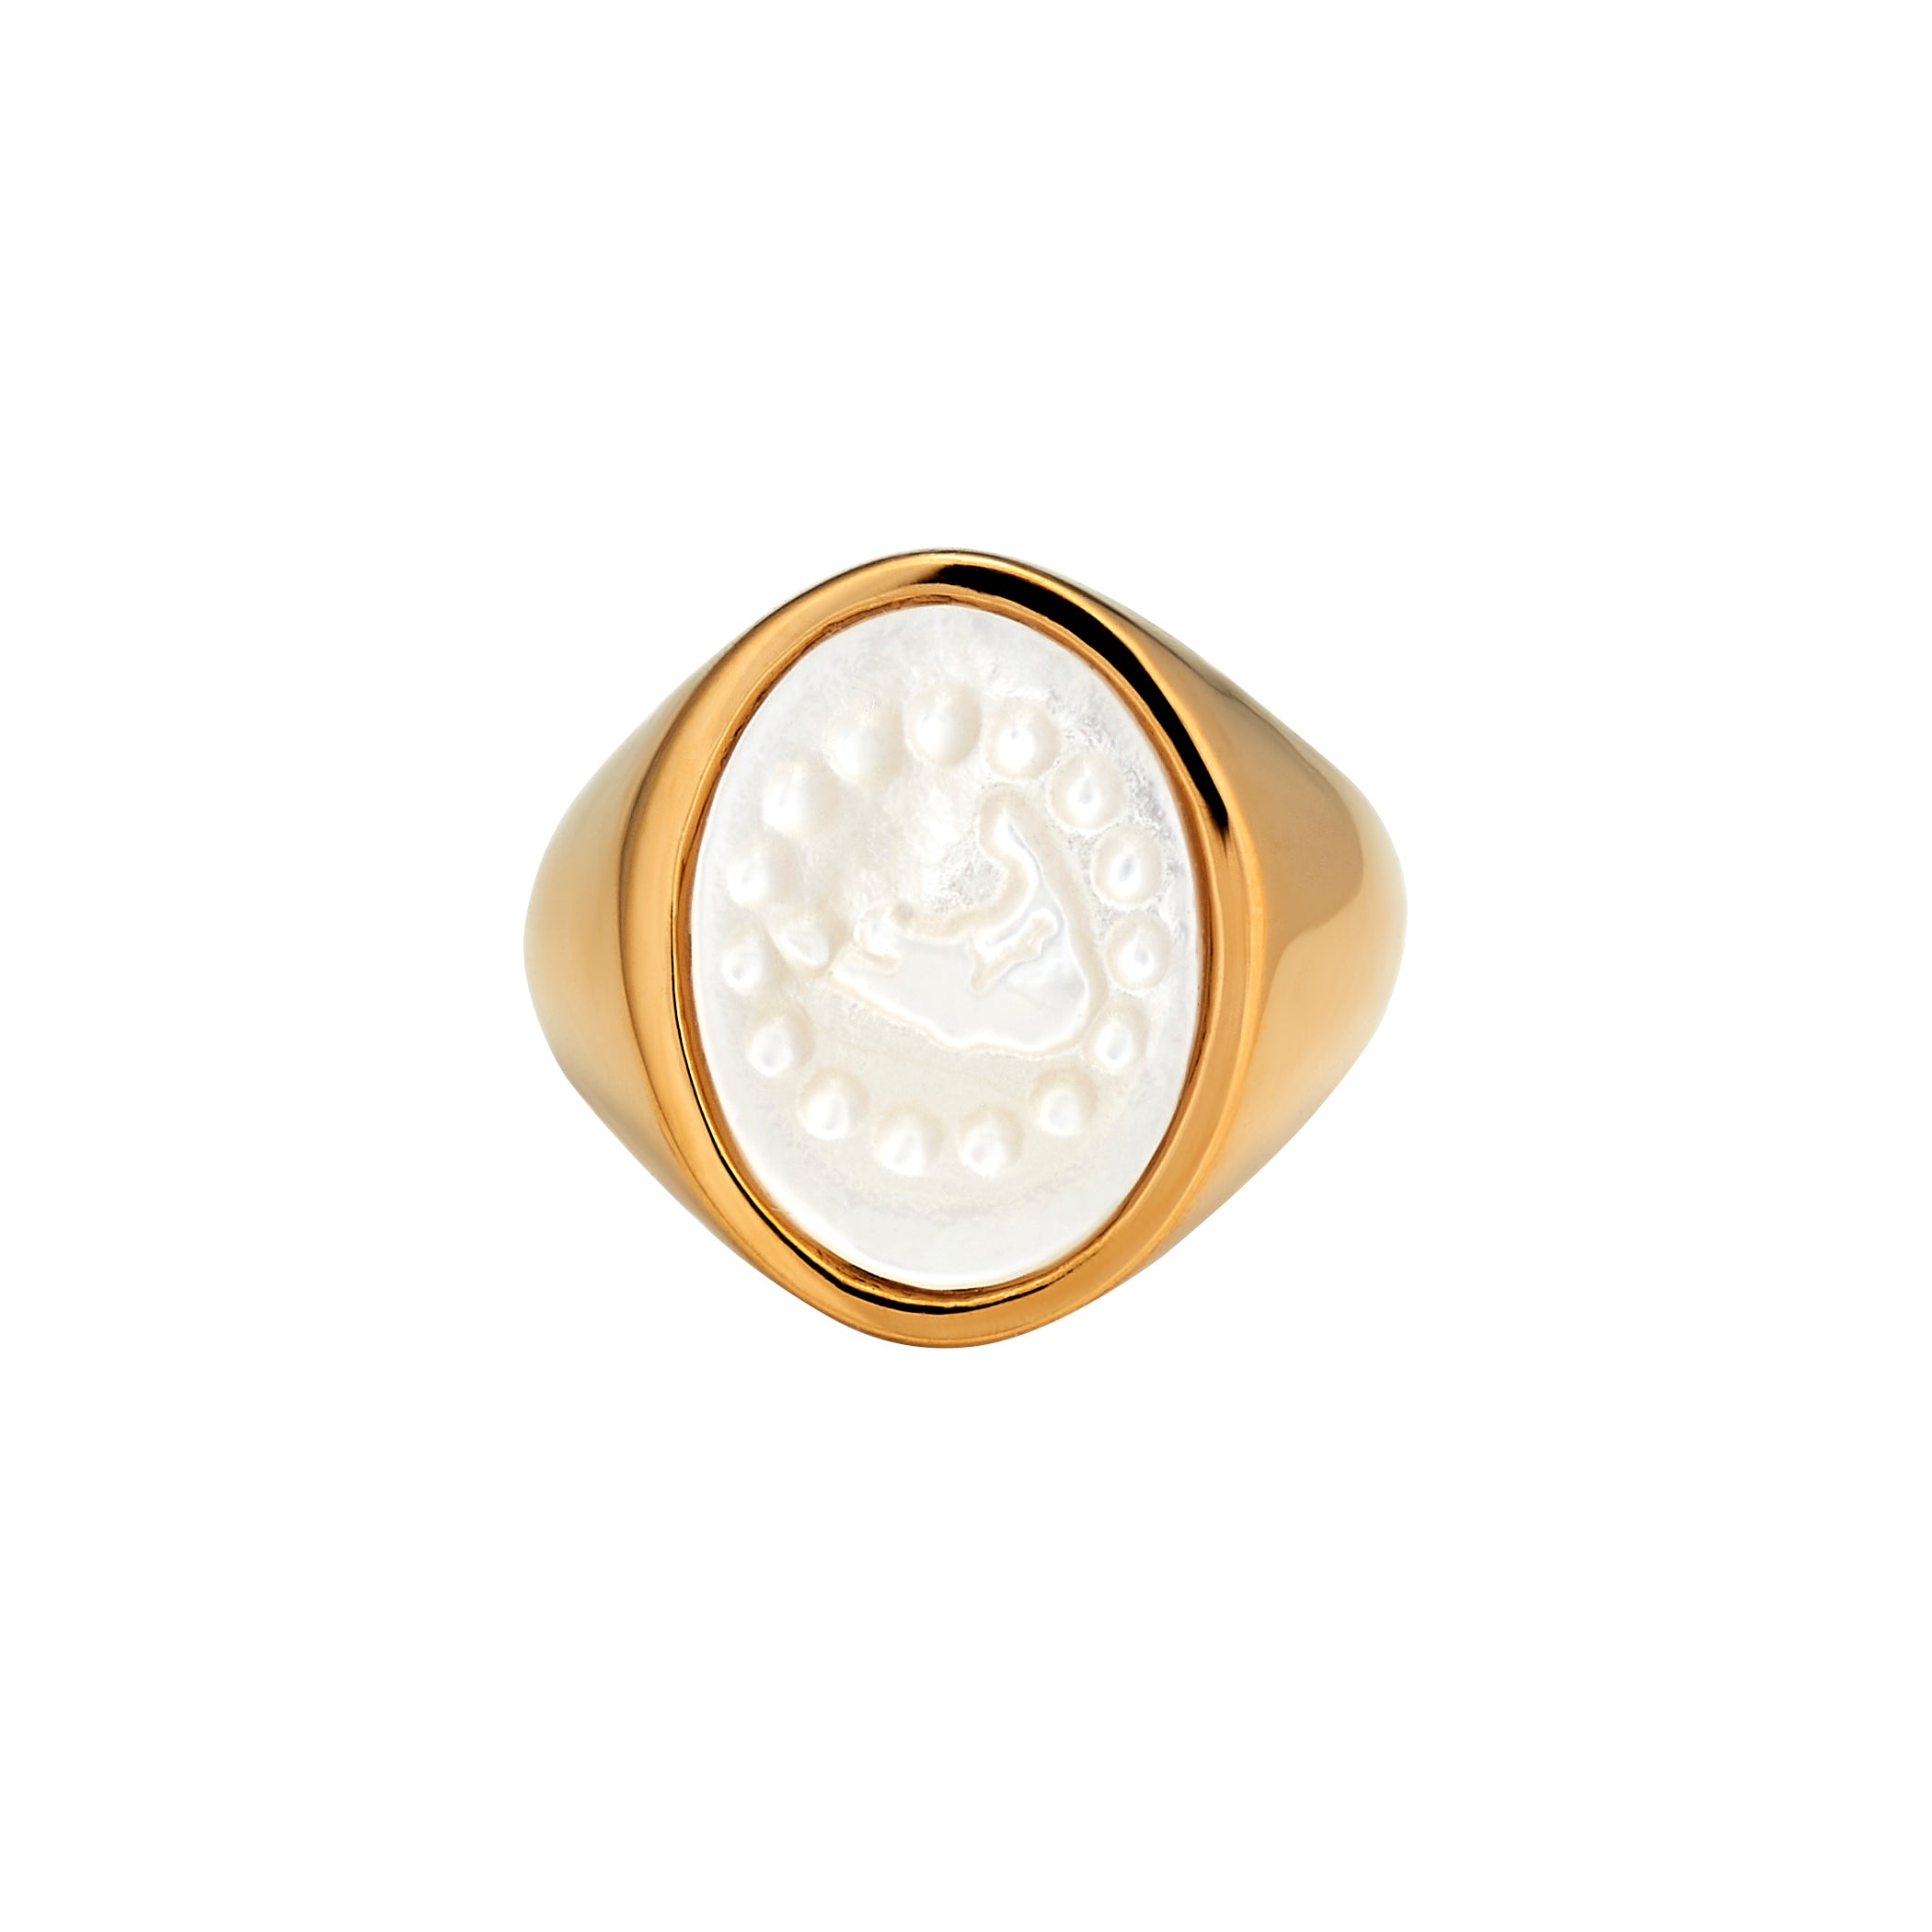 Nantucket Crest Pinky Ring